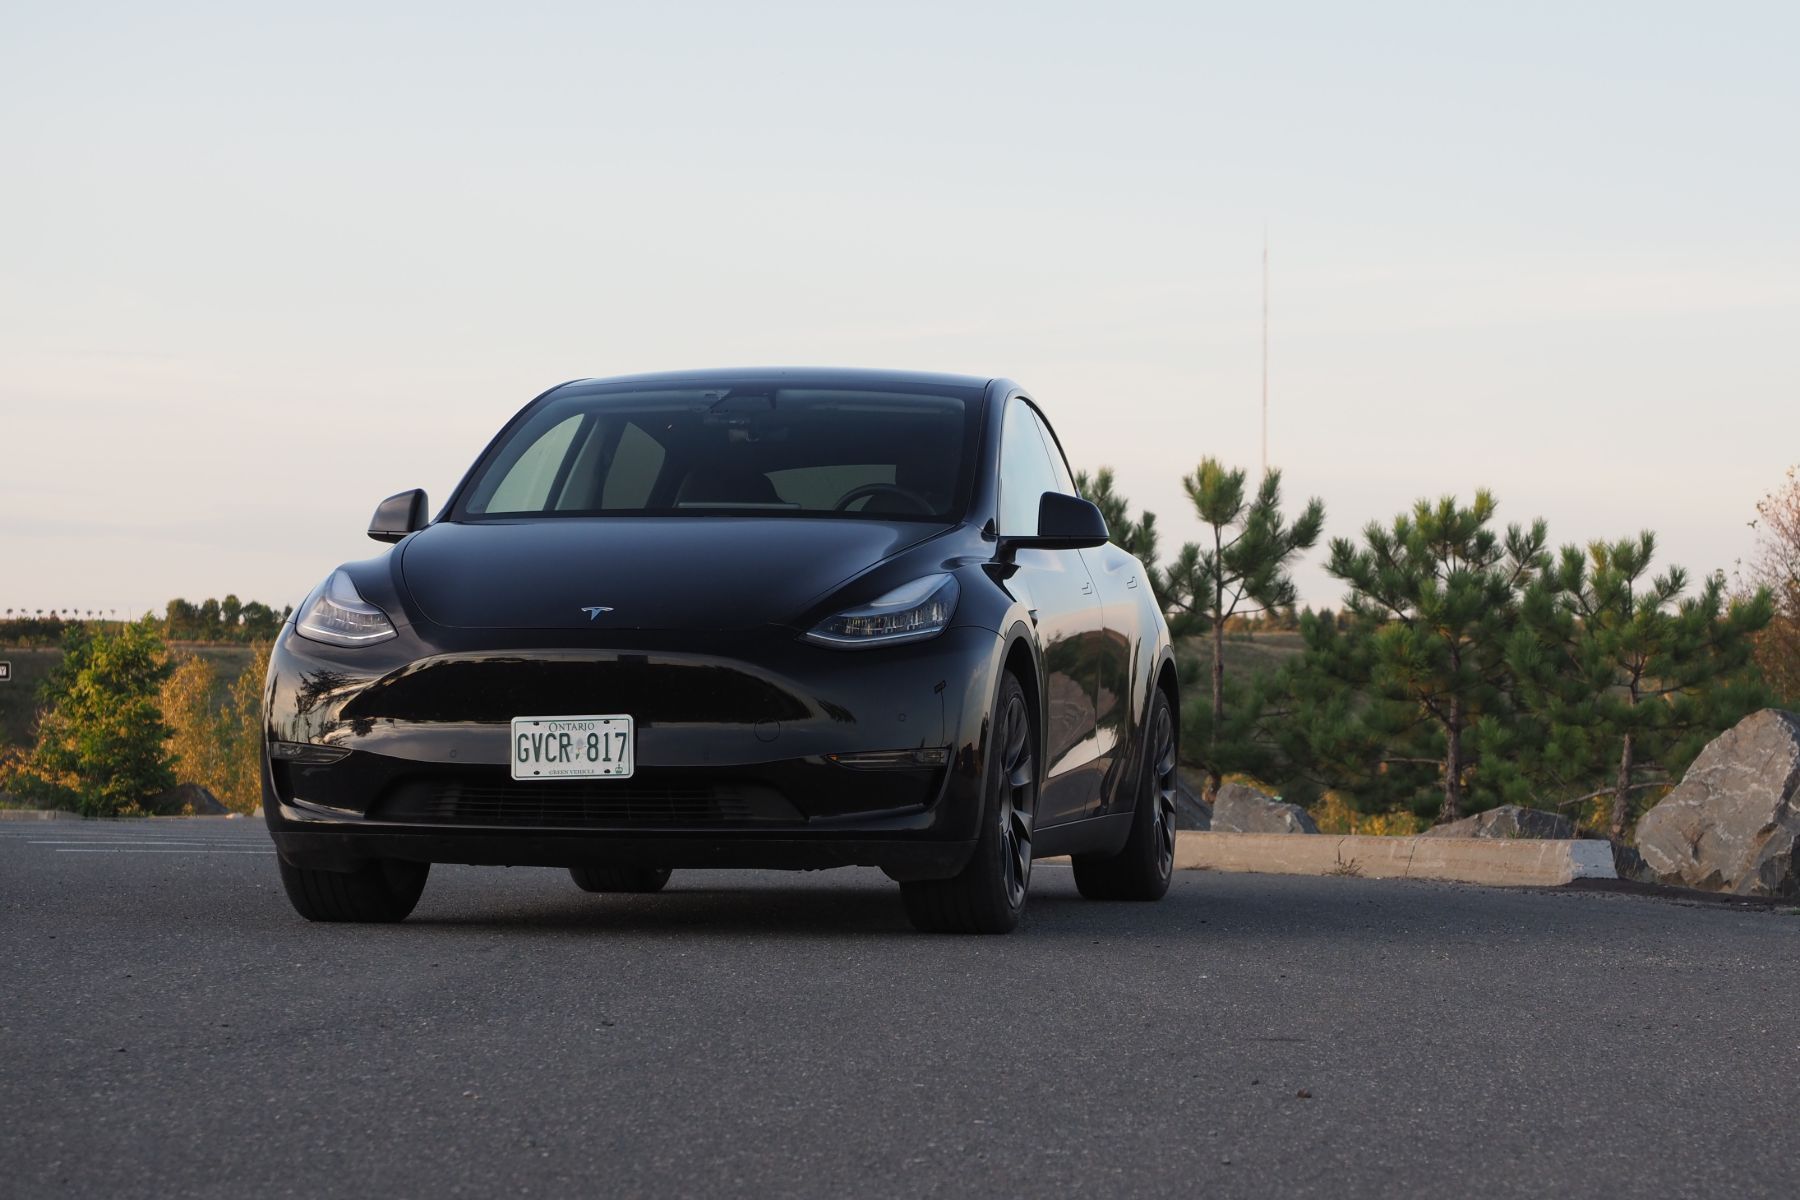 Tesla Model Y Becomes World's 3rd Best-Selling Car Challenging